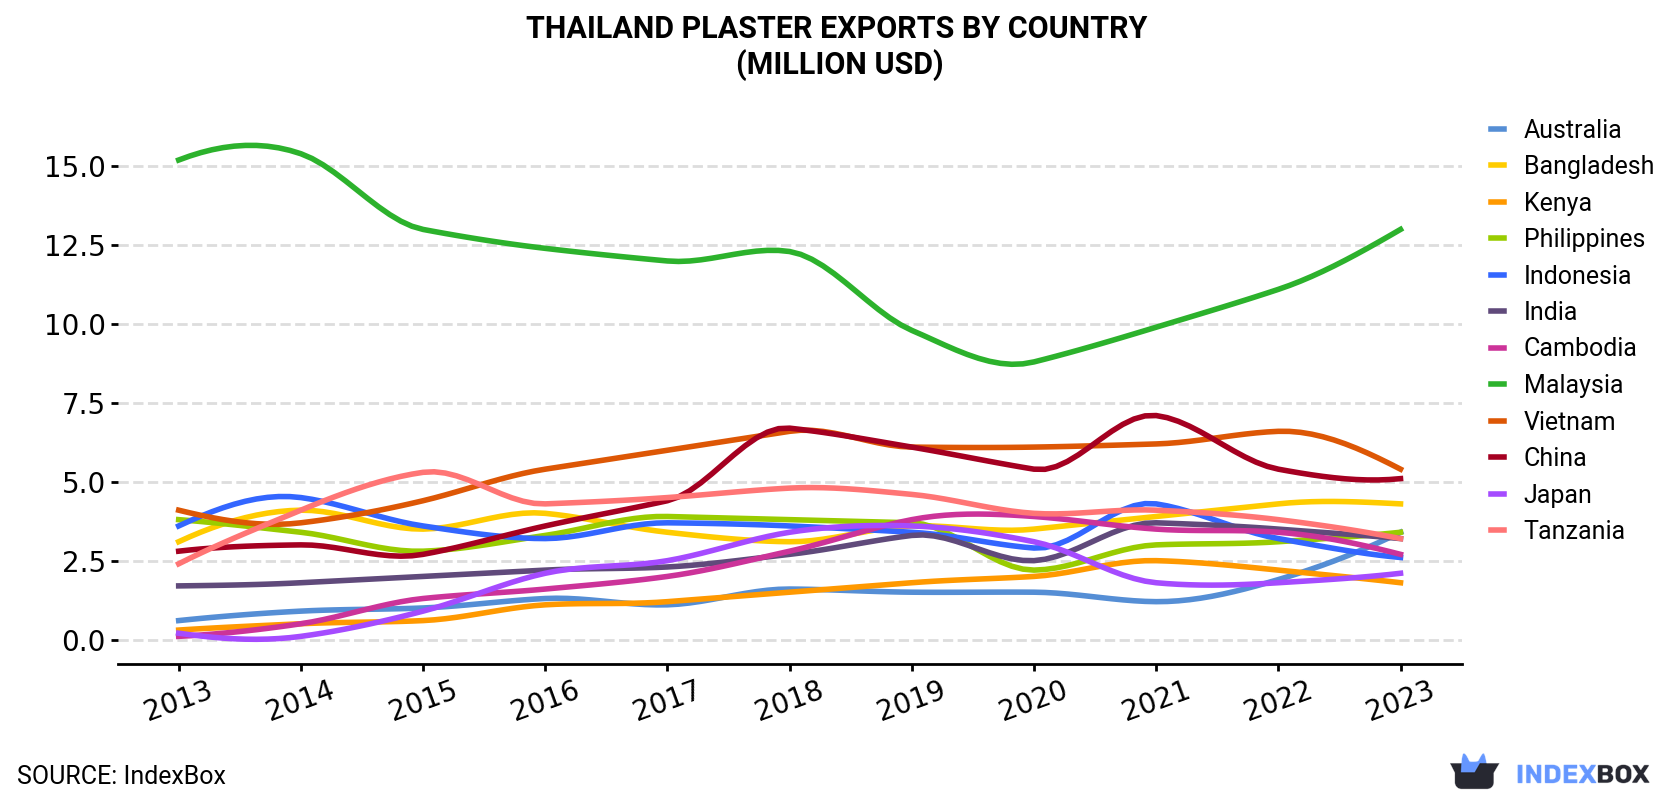 Thailand Plaster Exports By Country (Million USD)